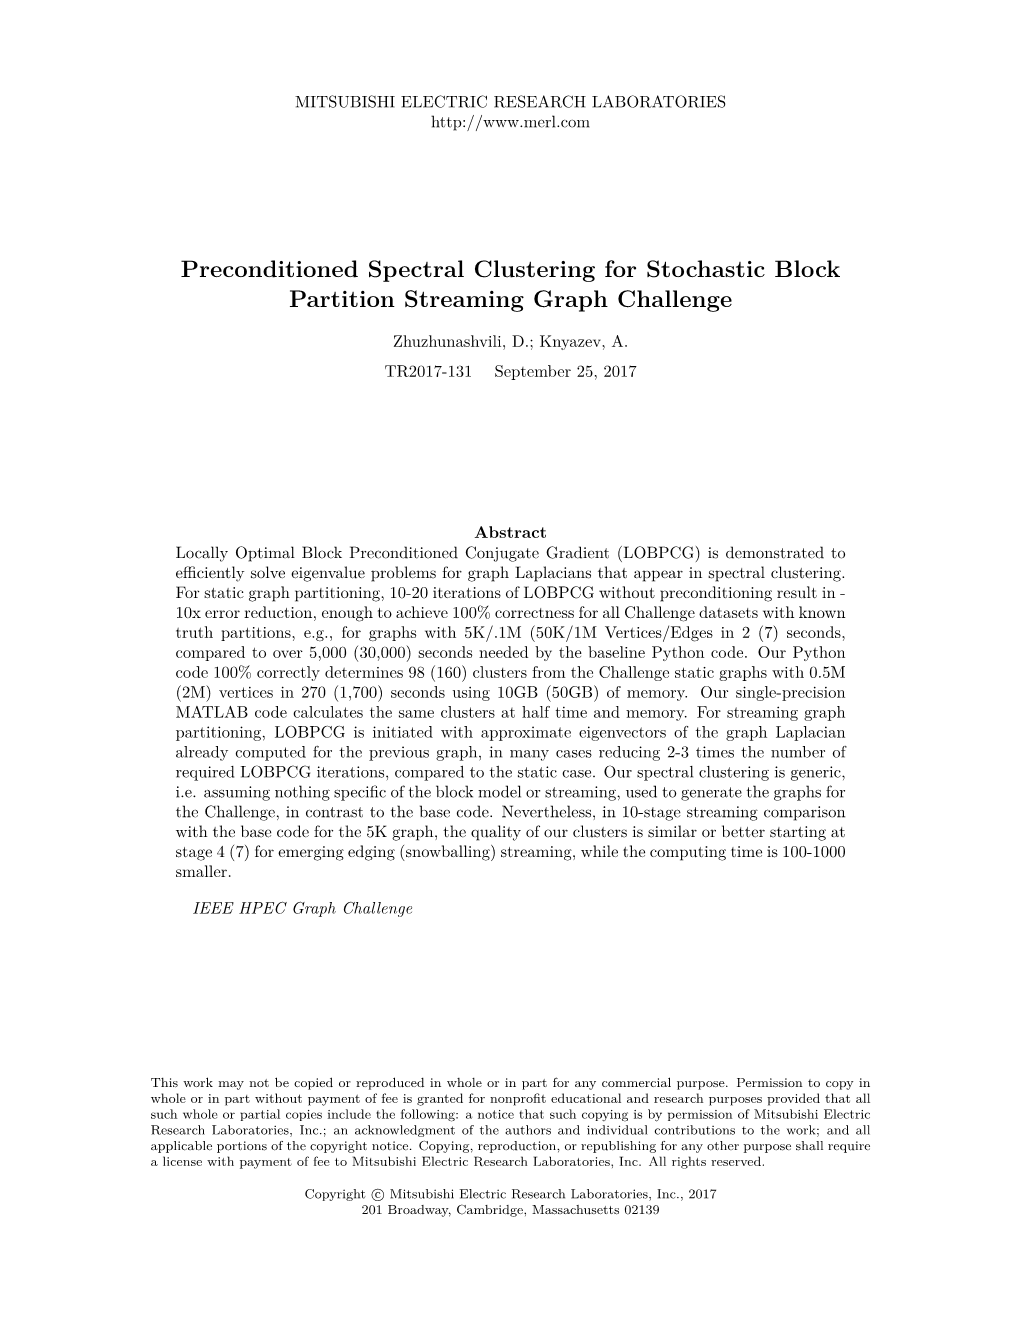 Preconditioned Spectral Clustering for Stochastic Block Partition Streaming Graph Challenge